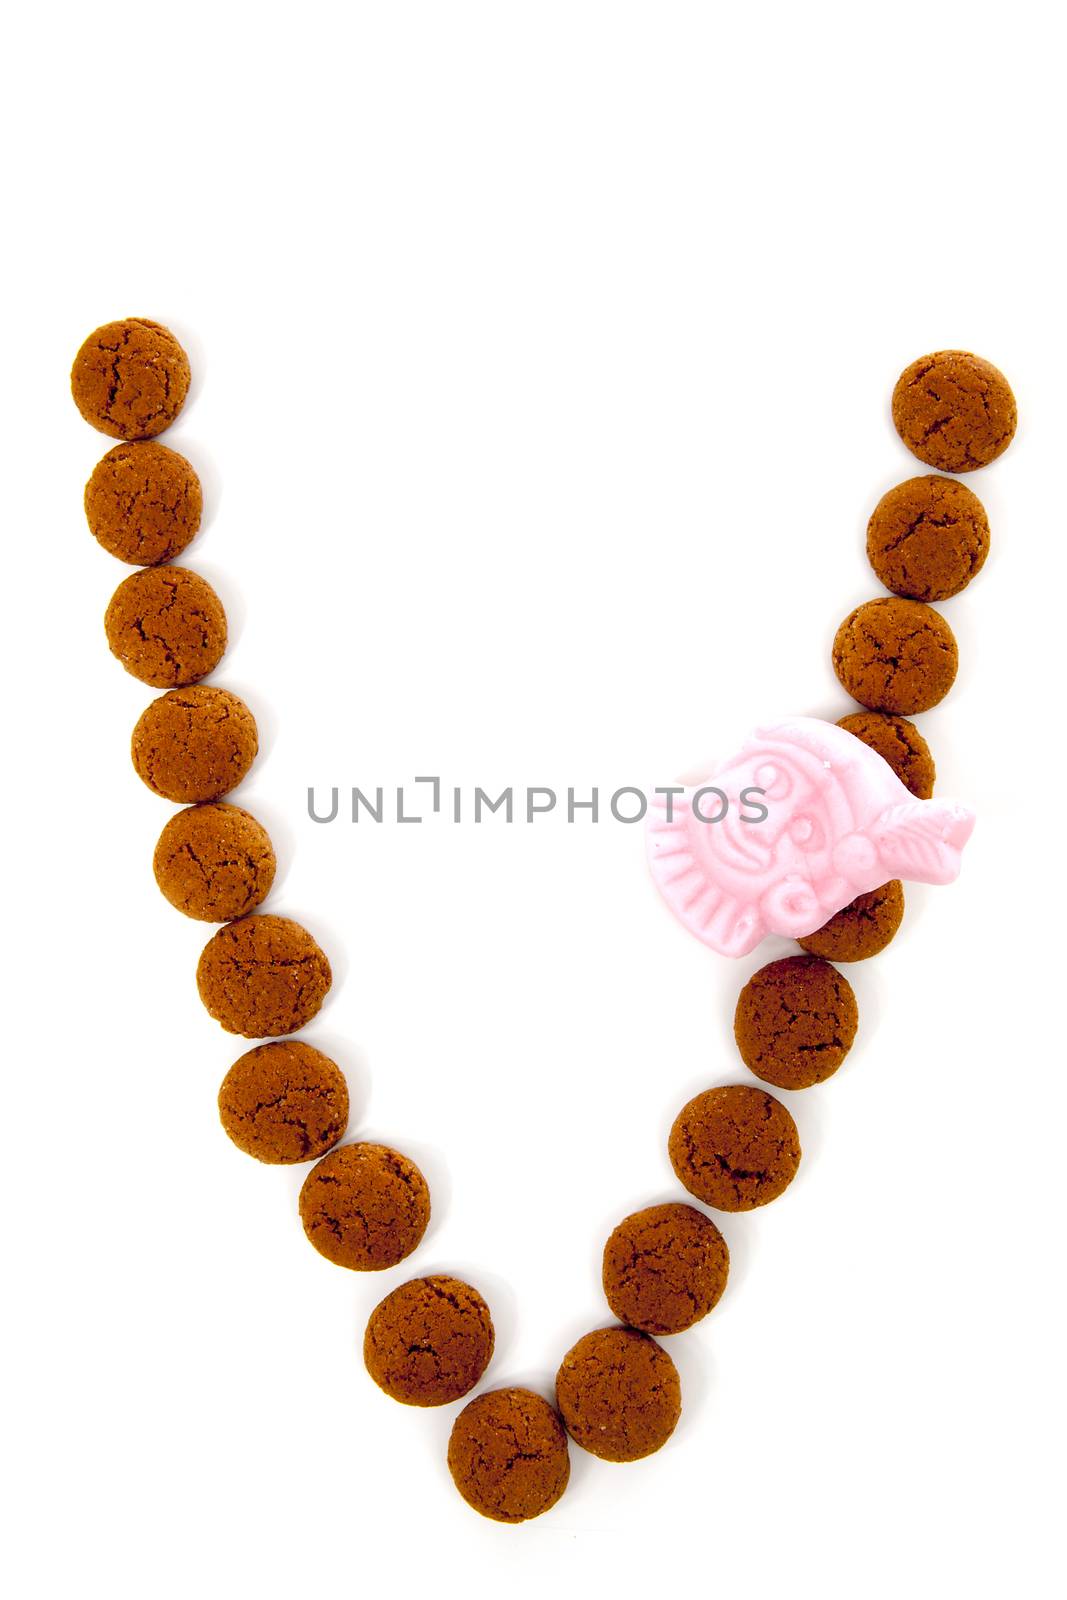 Ginger nuts, pepernoten, in the shape of letter V isolated on white background. Typical Dutch candy for Sinterklaas event in december